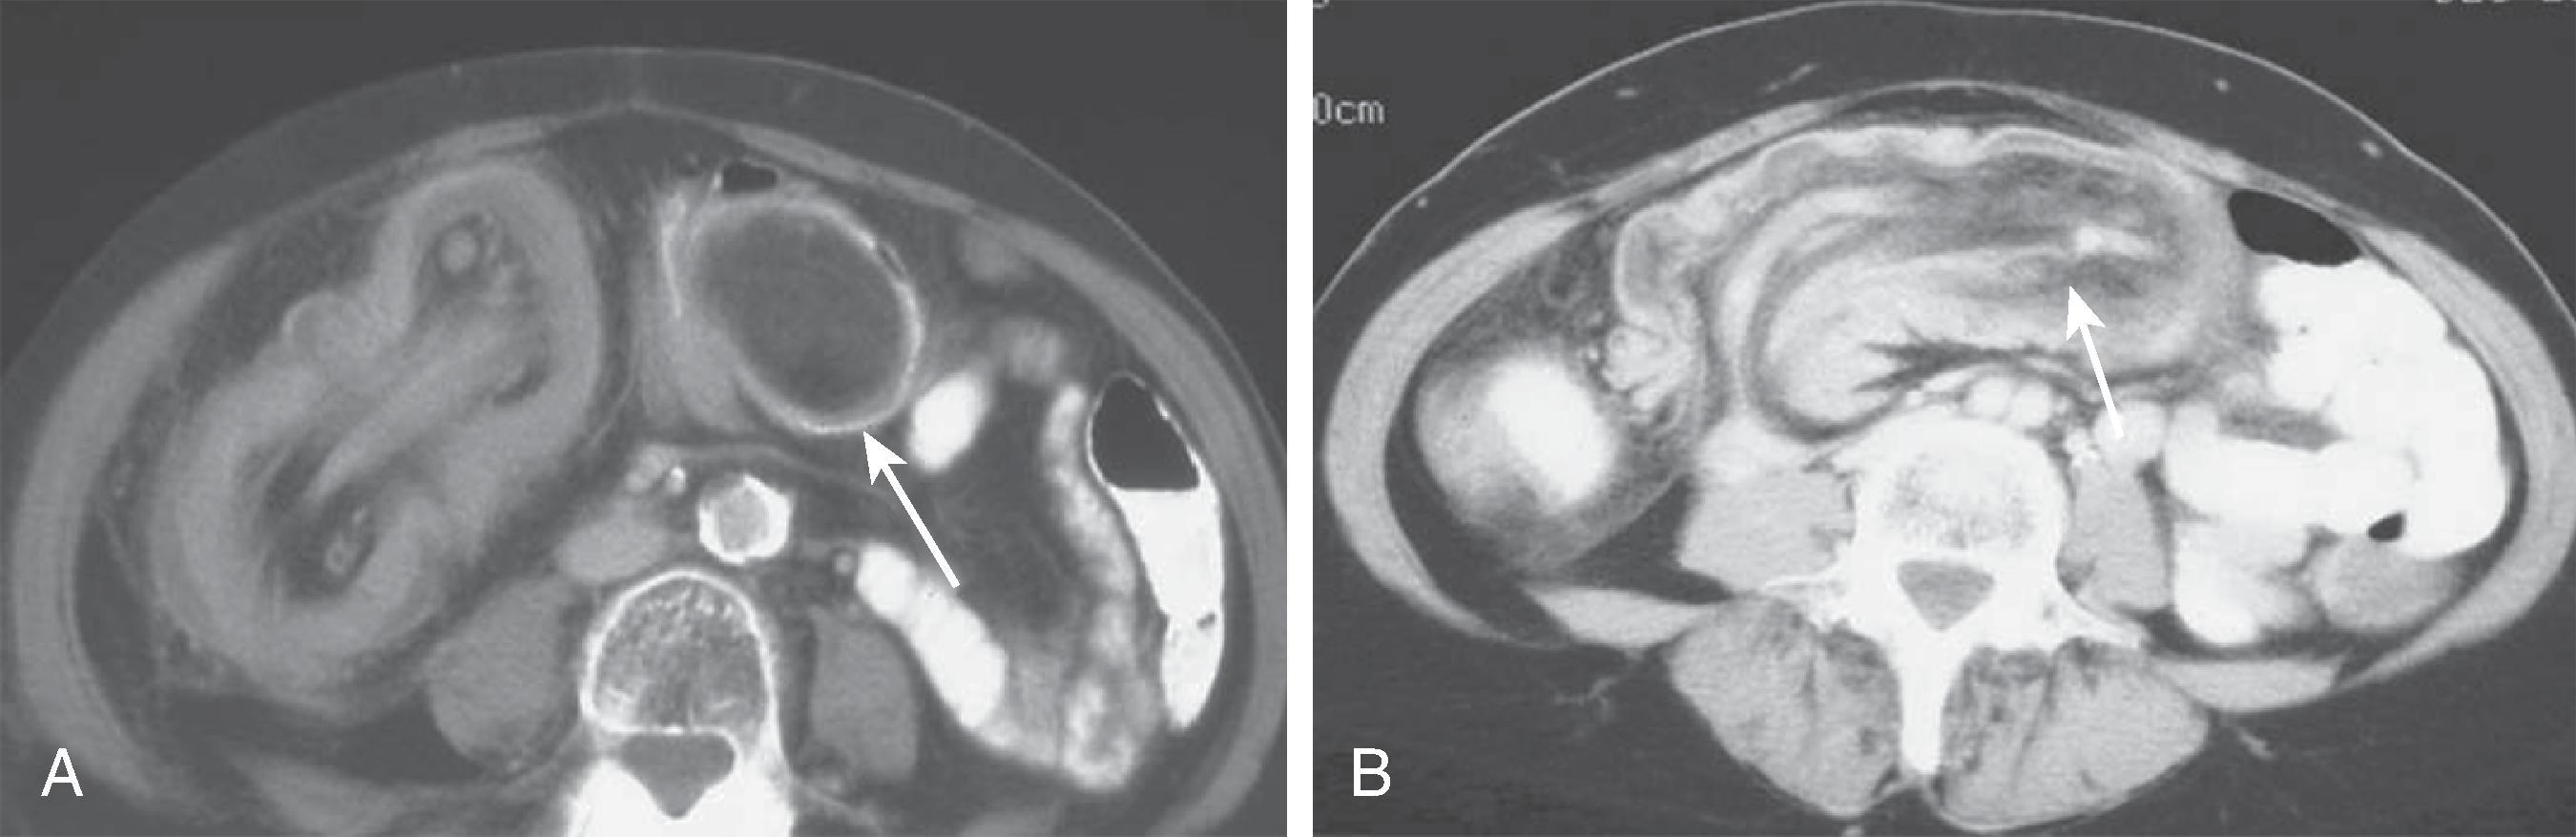 Fig. 46.9, Colonic intussusception: computed tomography findings. (A) The lead point of this colonic intussusception is a lipoma (arrow) . The outer layer represents the intussuscipiens and the inner layer represents the intussusceptum. (B) In a different patient, the cigar-shaped intussusceptum (arrow) is seen within the intussuscipiens.